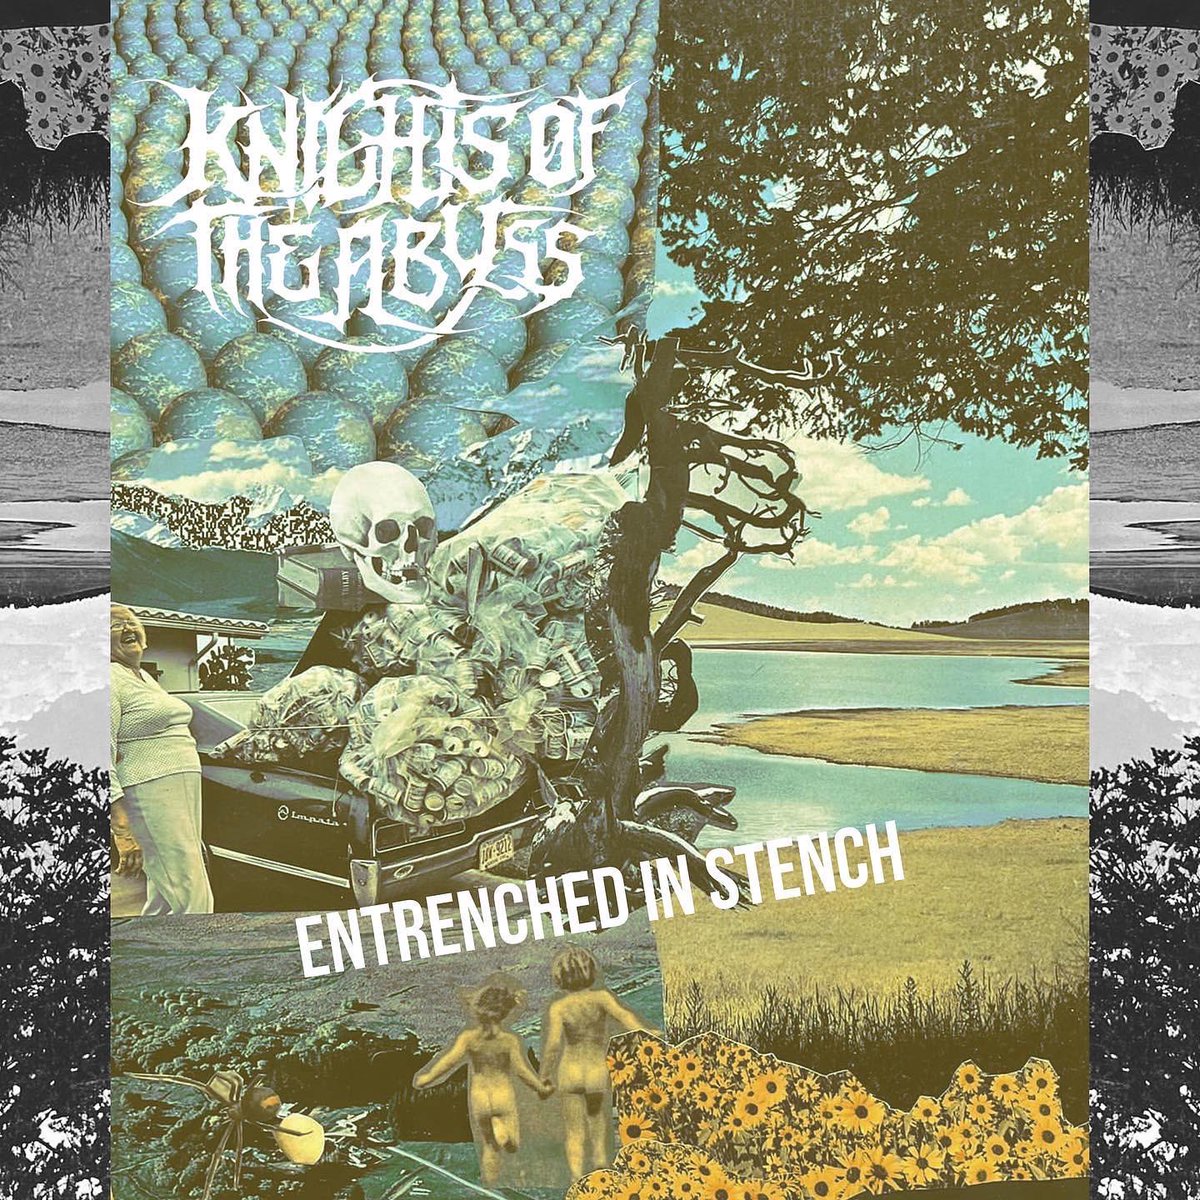 Entrenched In Stench out now on all streaming platforms! #deathmetal #deathcore #knightsoftheabyss #jobforacowboy #gatecreeper #allshallperish #suicidesilence #oceano #deadtofall #molotovsolution